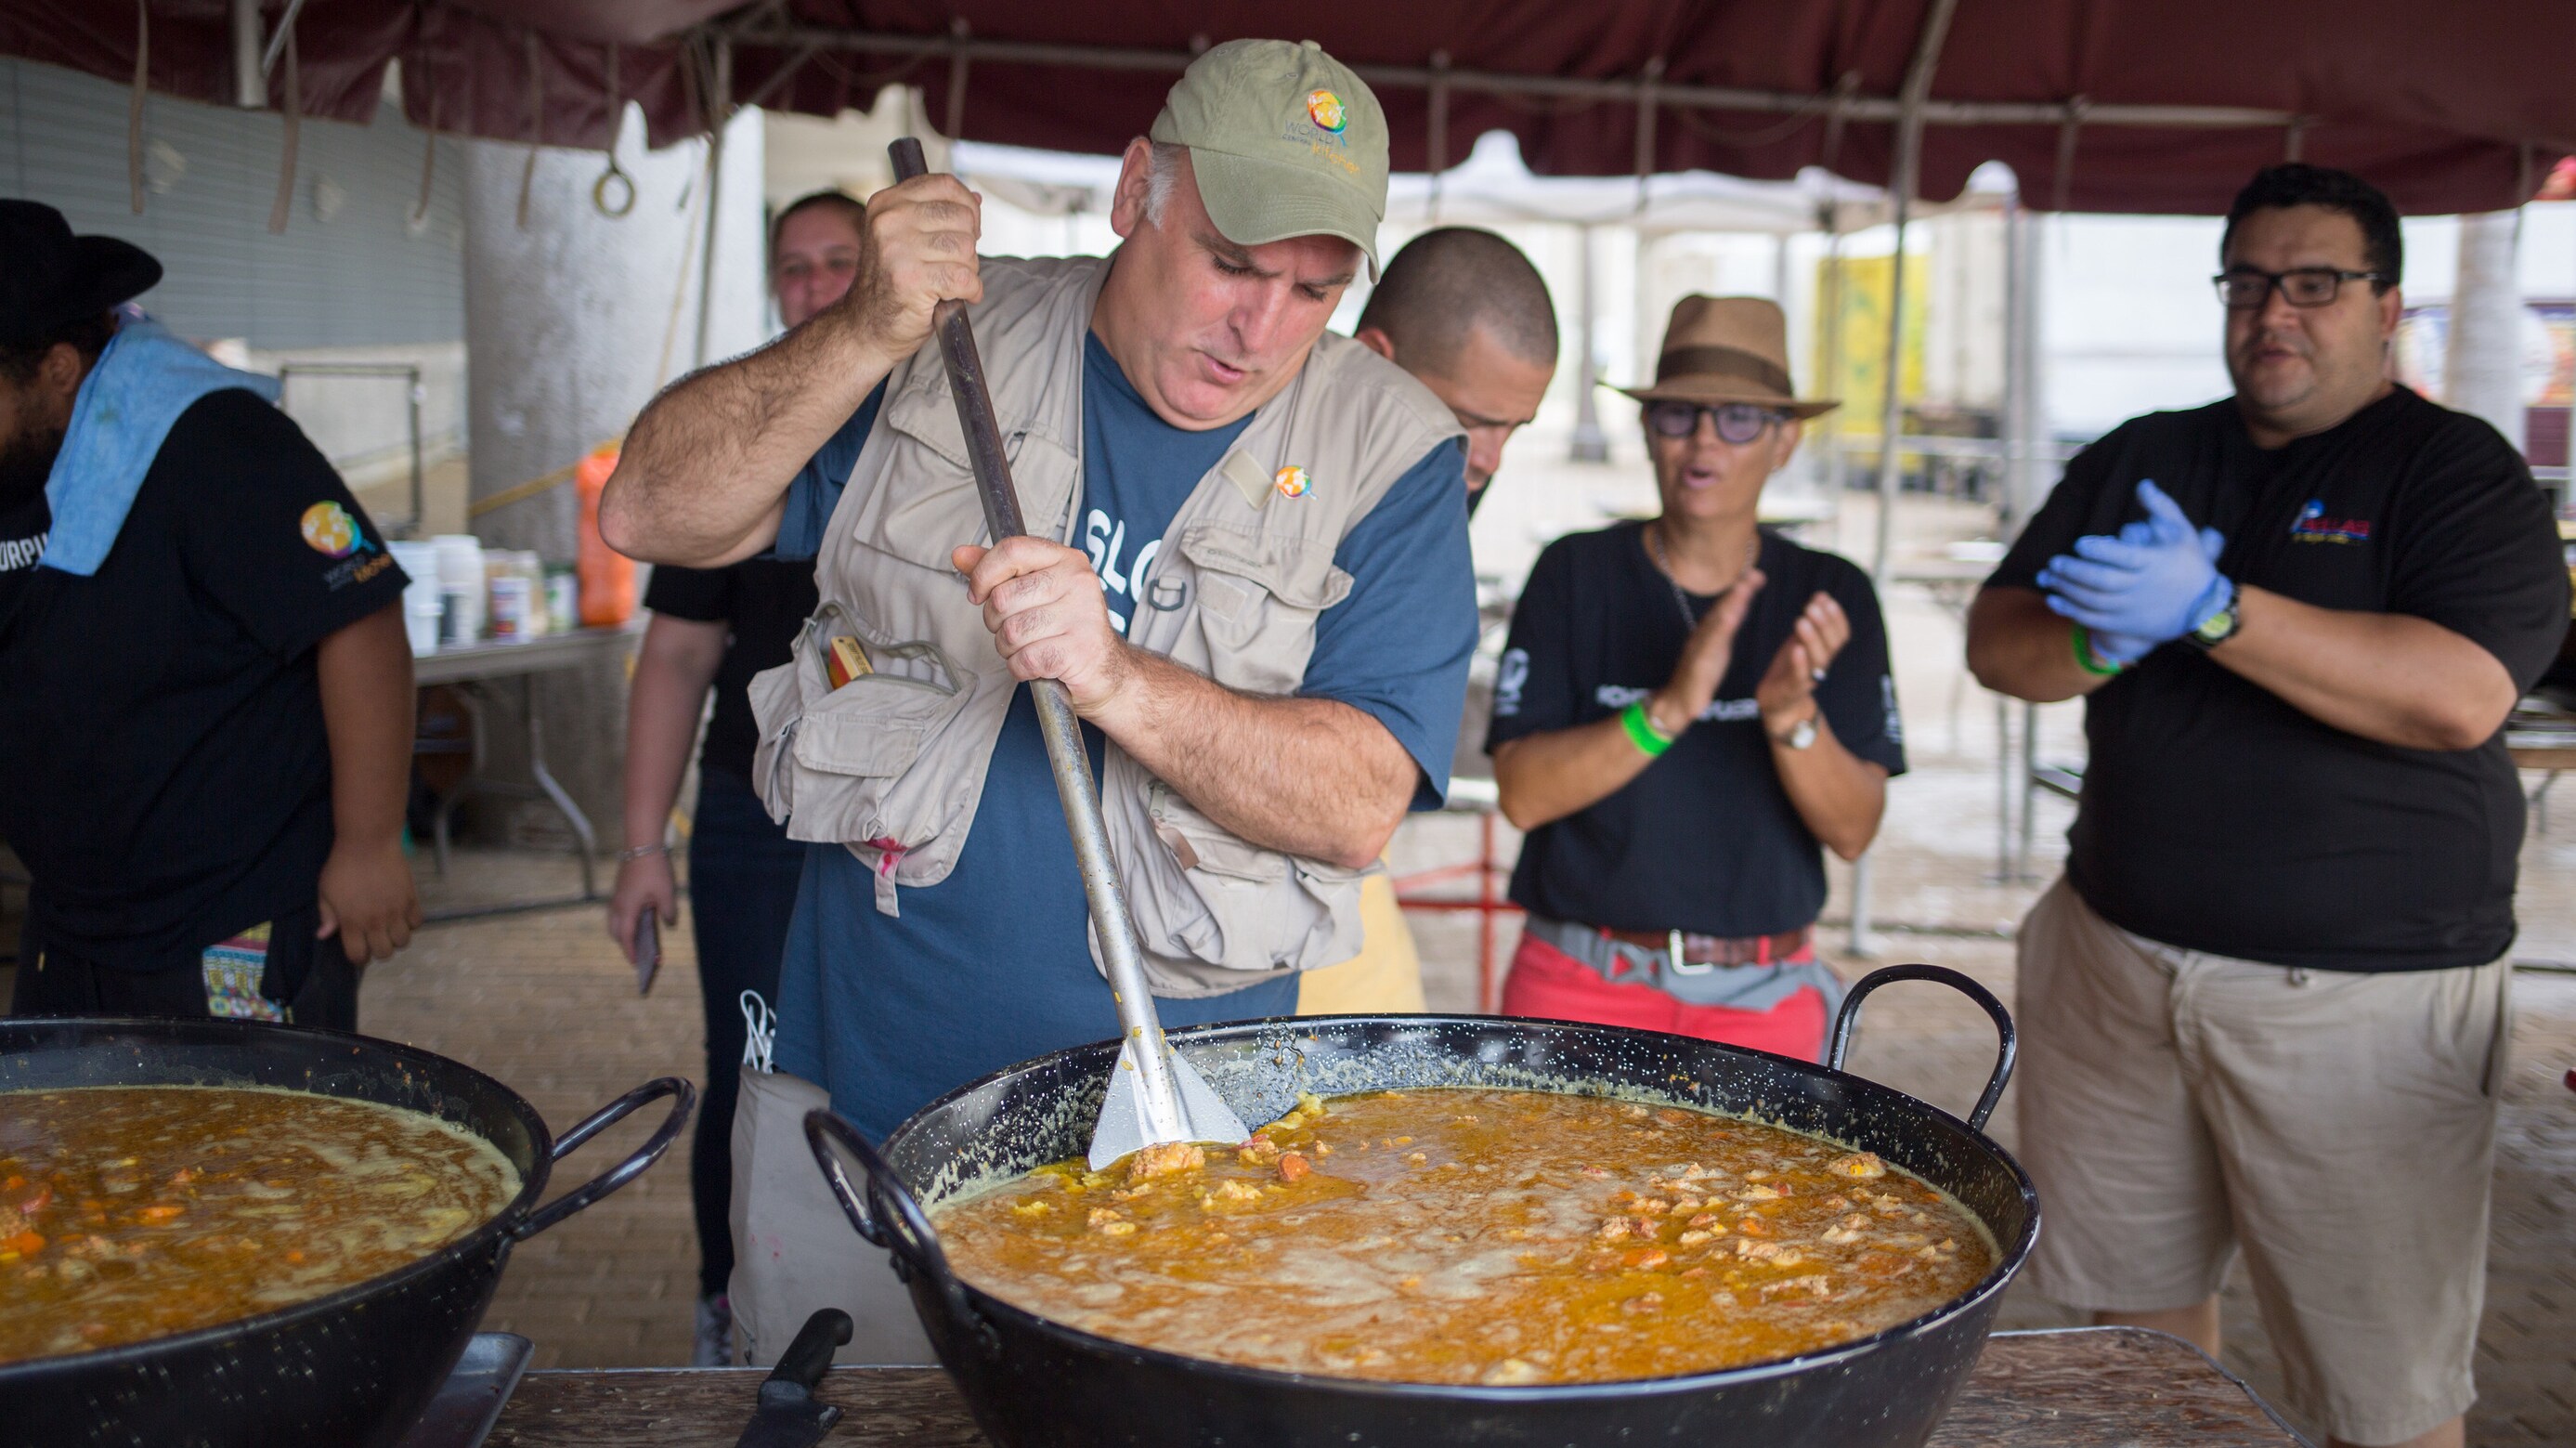 José Andrés (front left) stirs a pot of food in San Juan, Puerto Rico. (Credit: National Geographic)